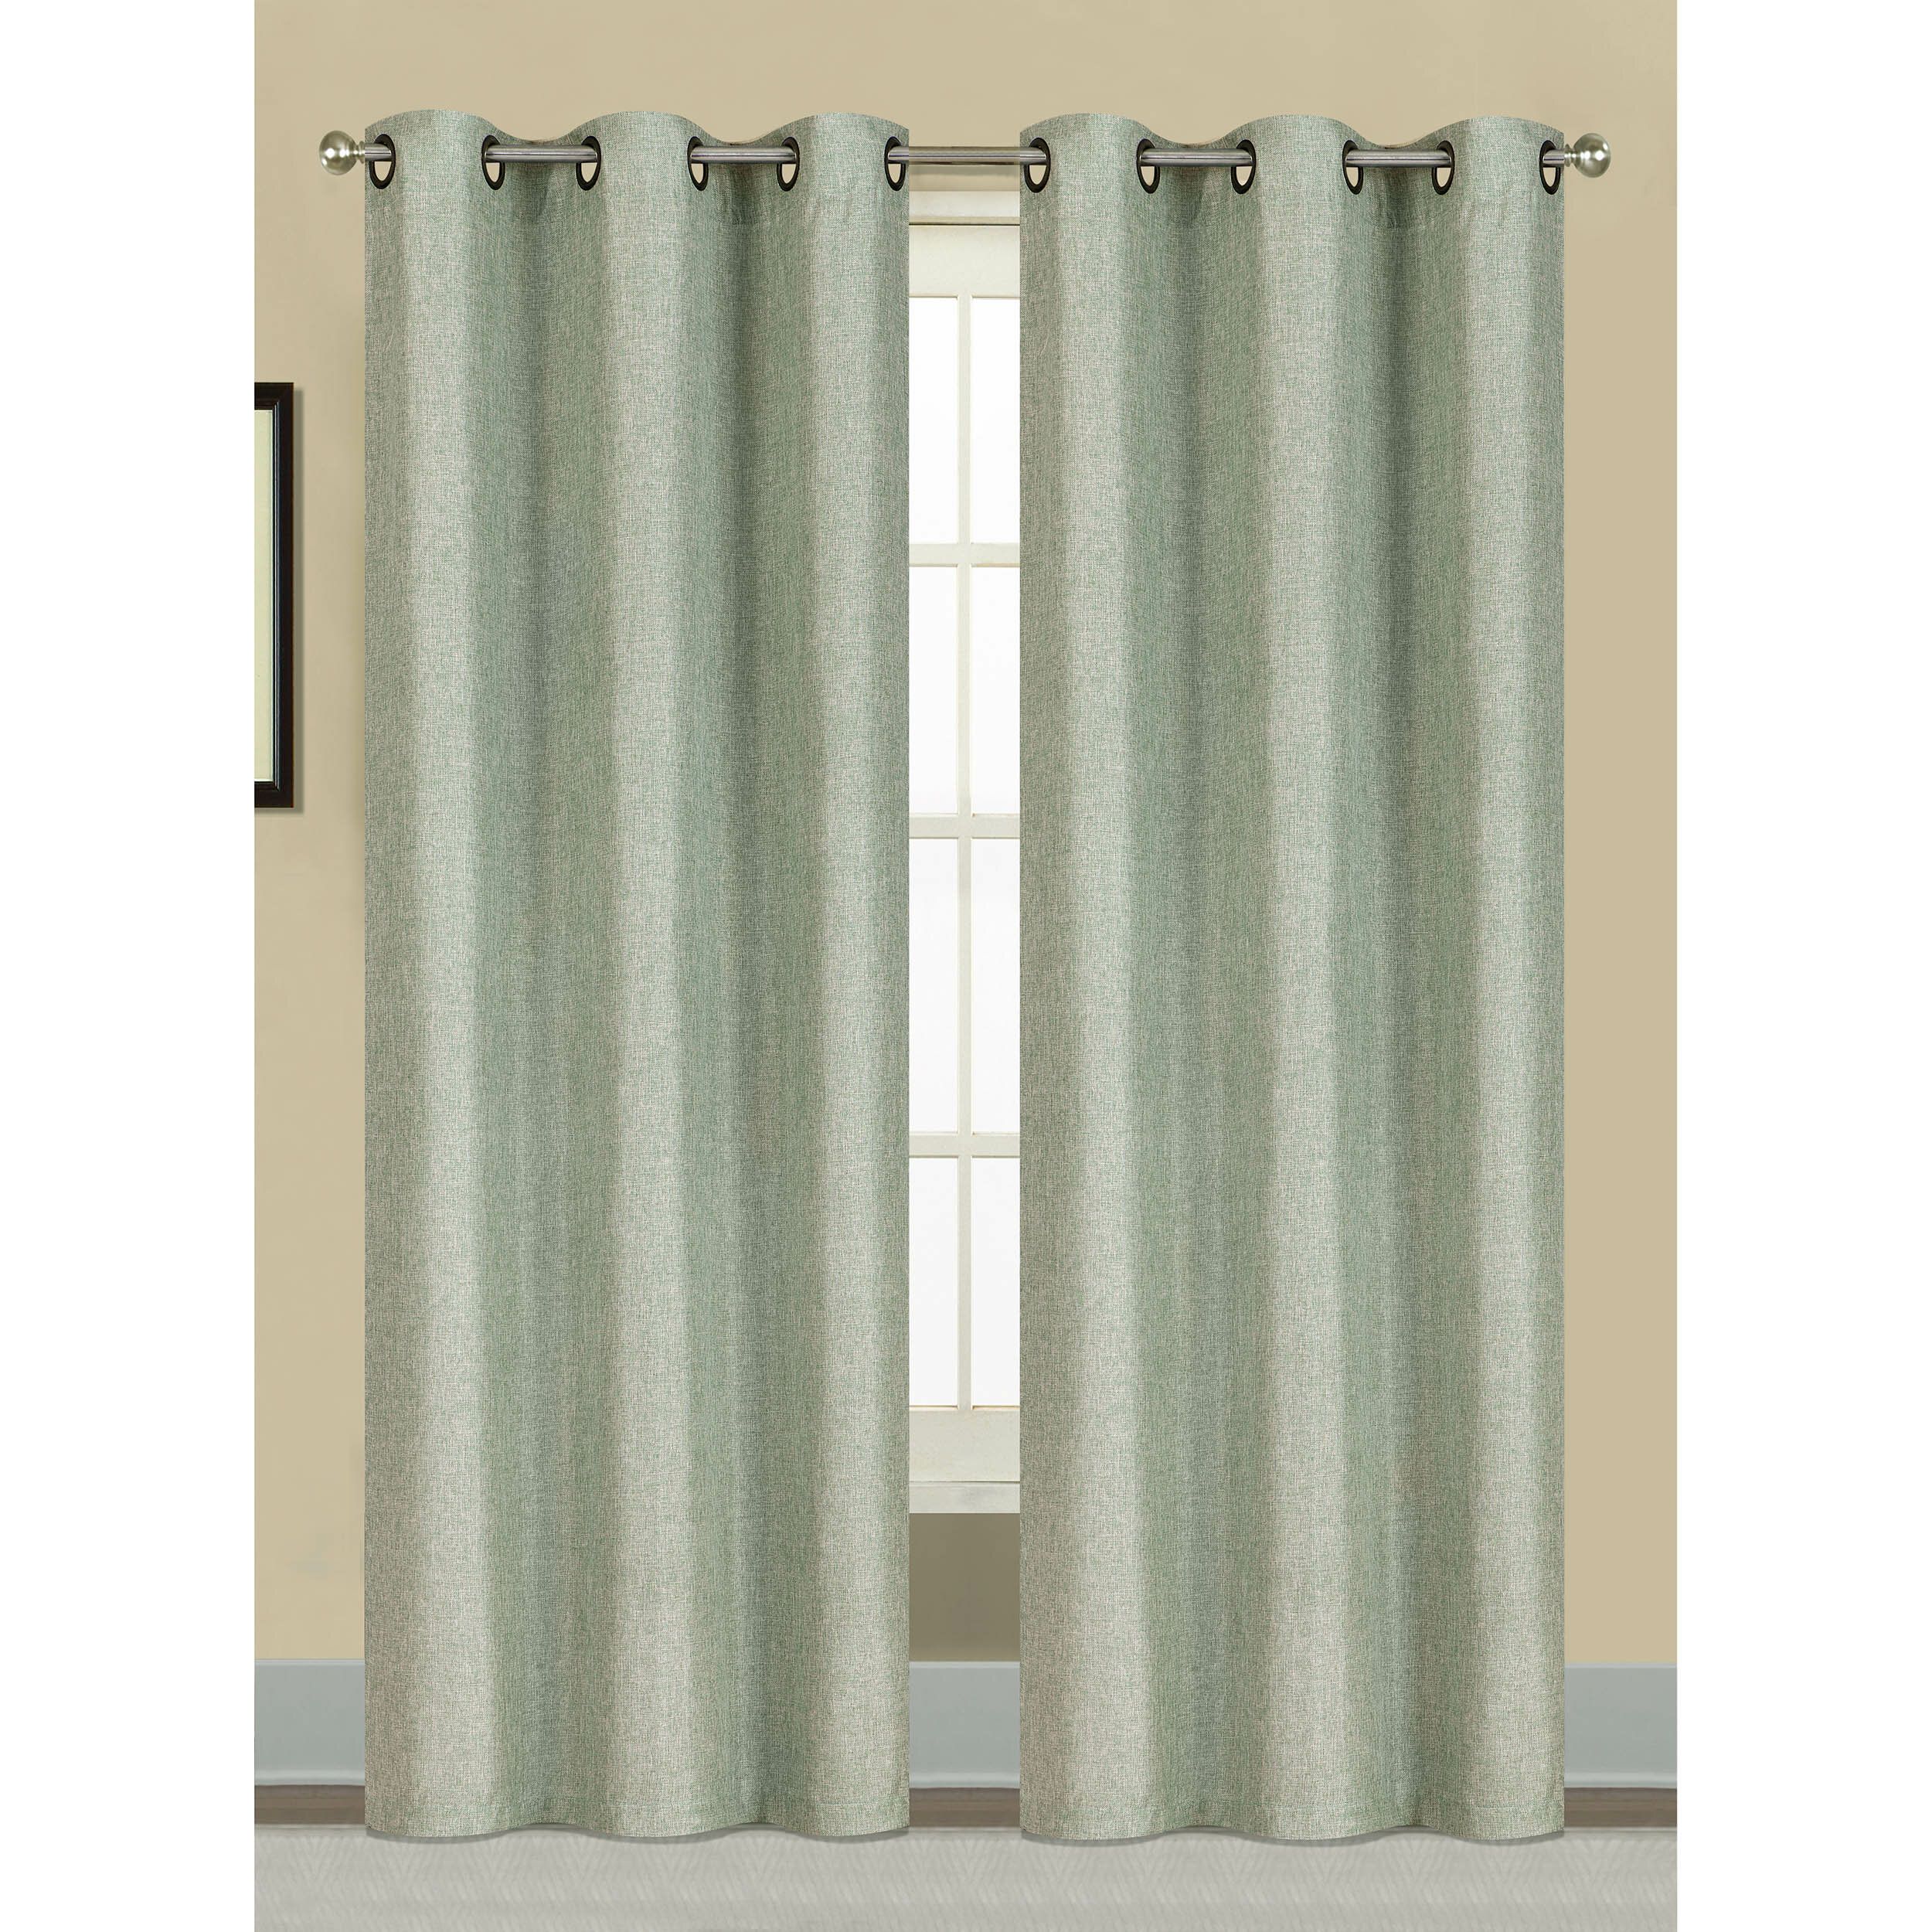 Window Elements Willow Textured Woven Solid Sheer Grommet Intended For Willow Rod Pocket Window Curtain Panels (View 27 of 30)